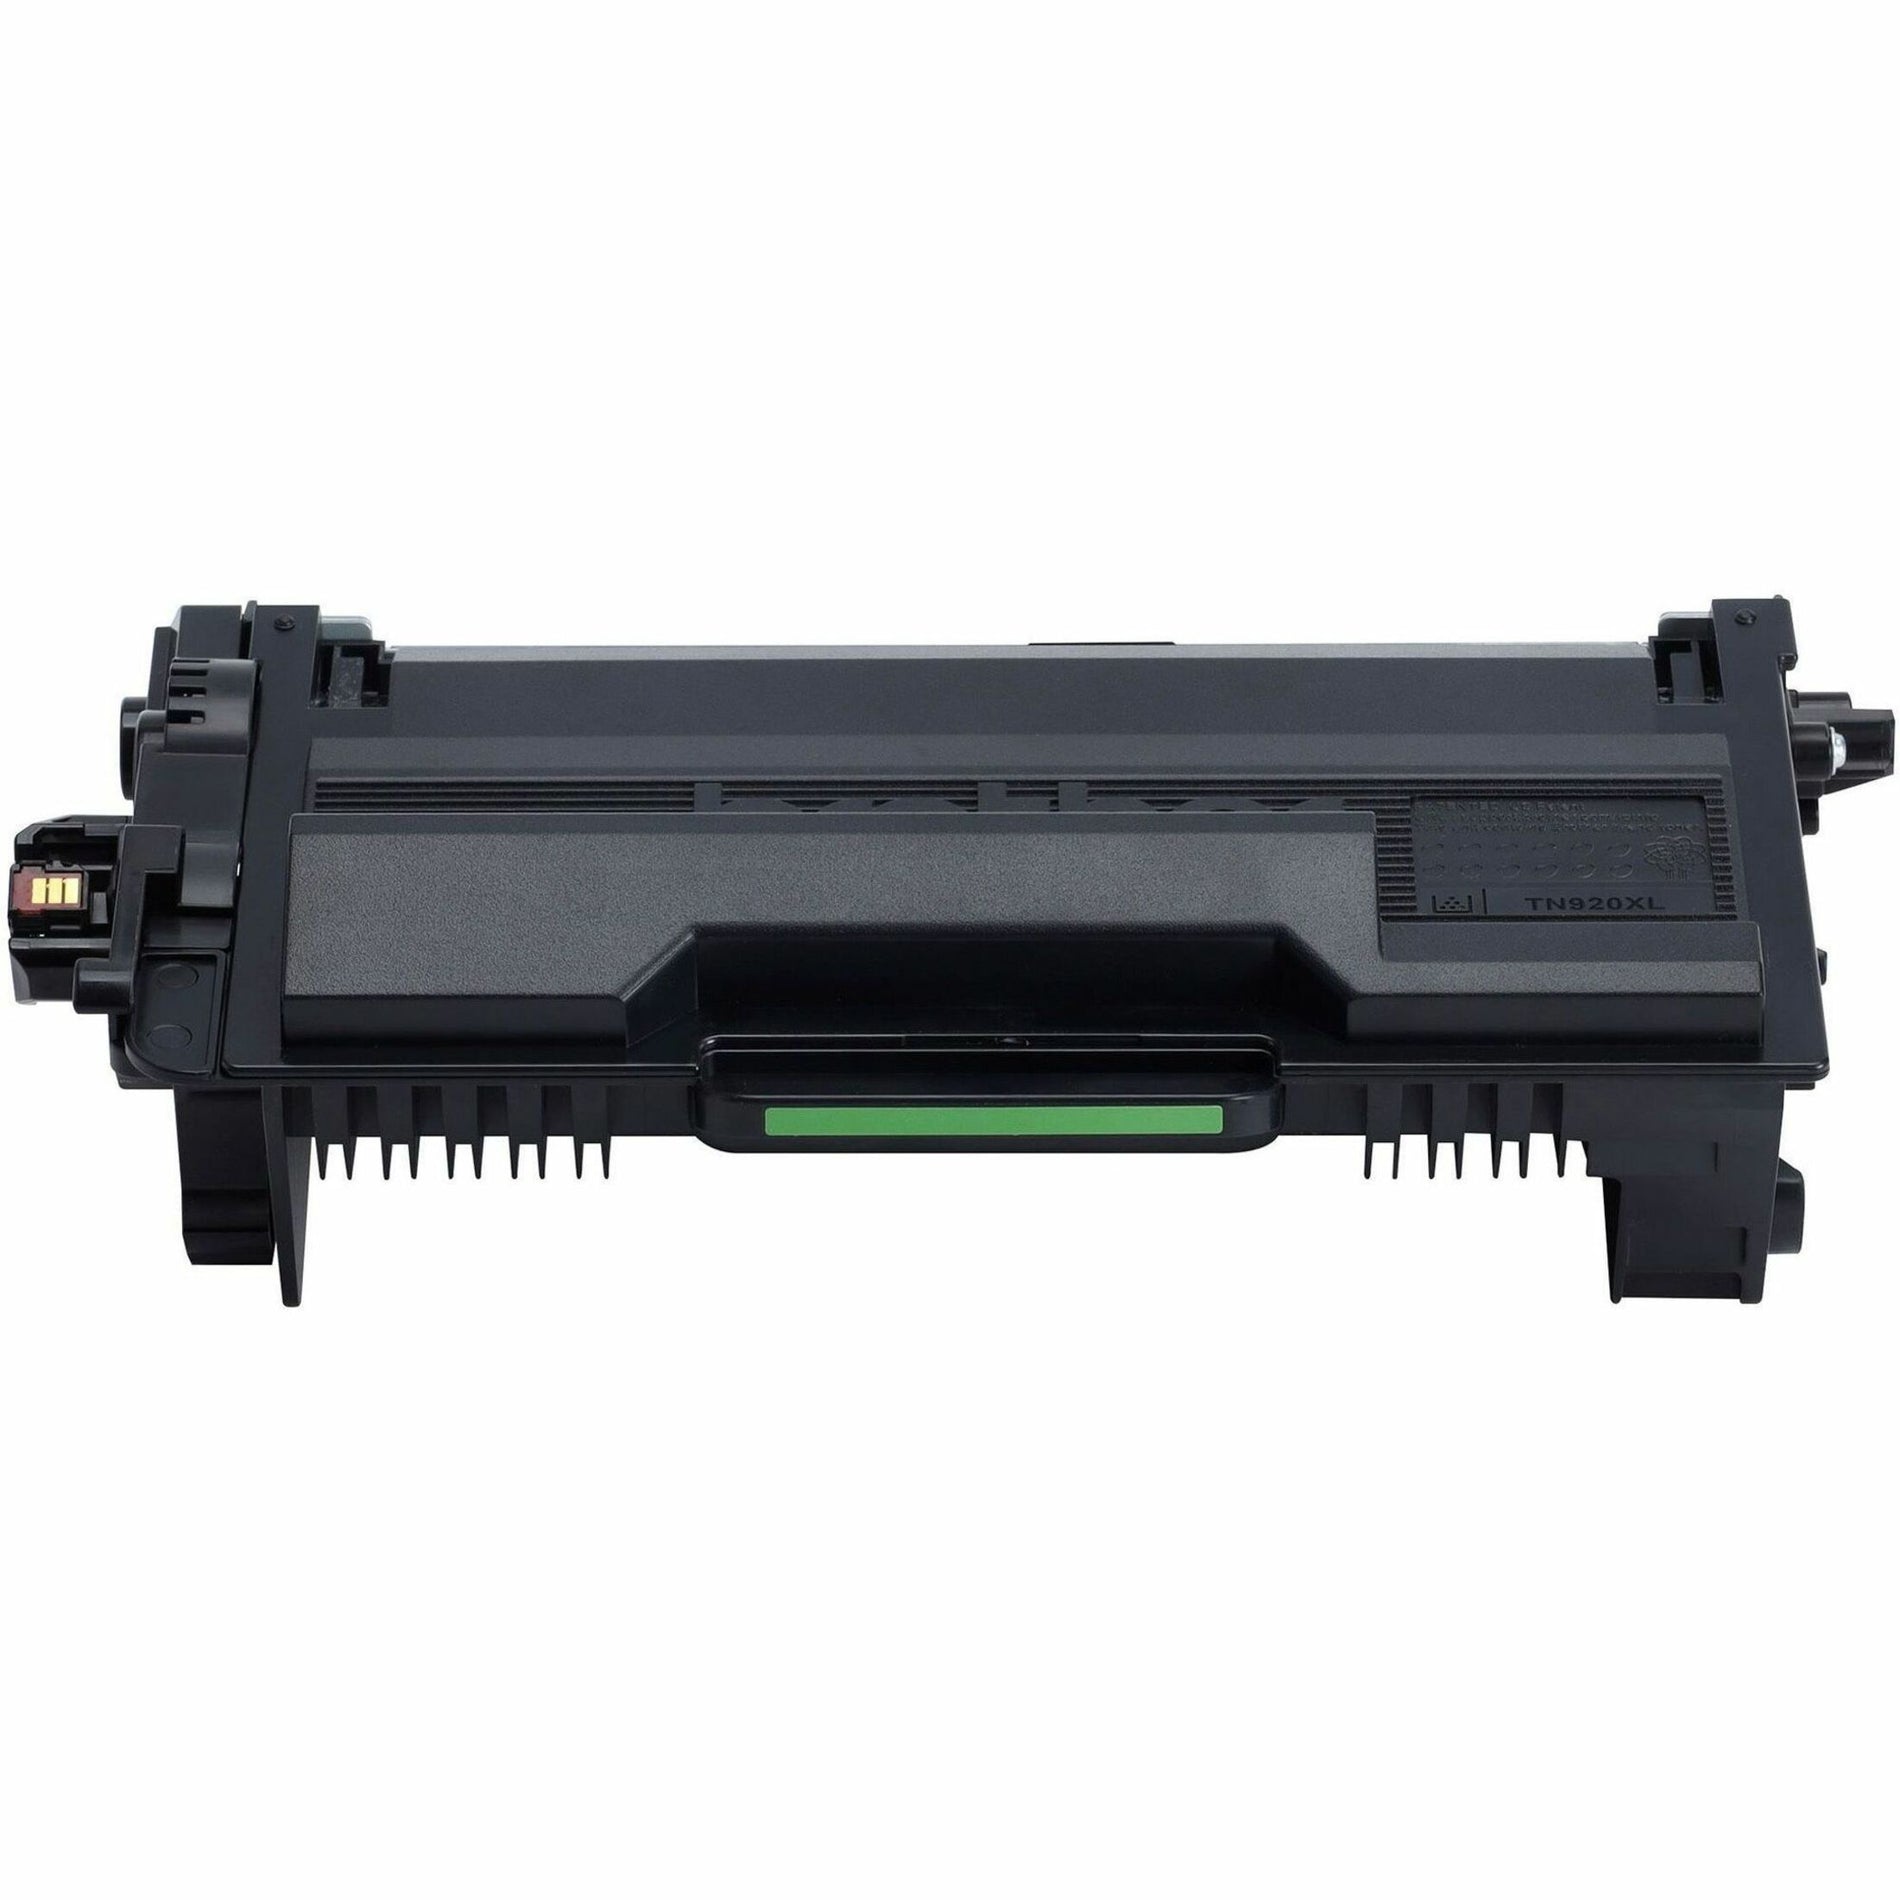 Brother TN920XL High-yield Toner Cartridge, Black - 6000 Pages